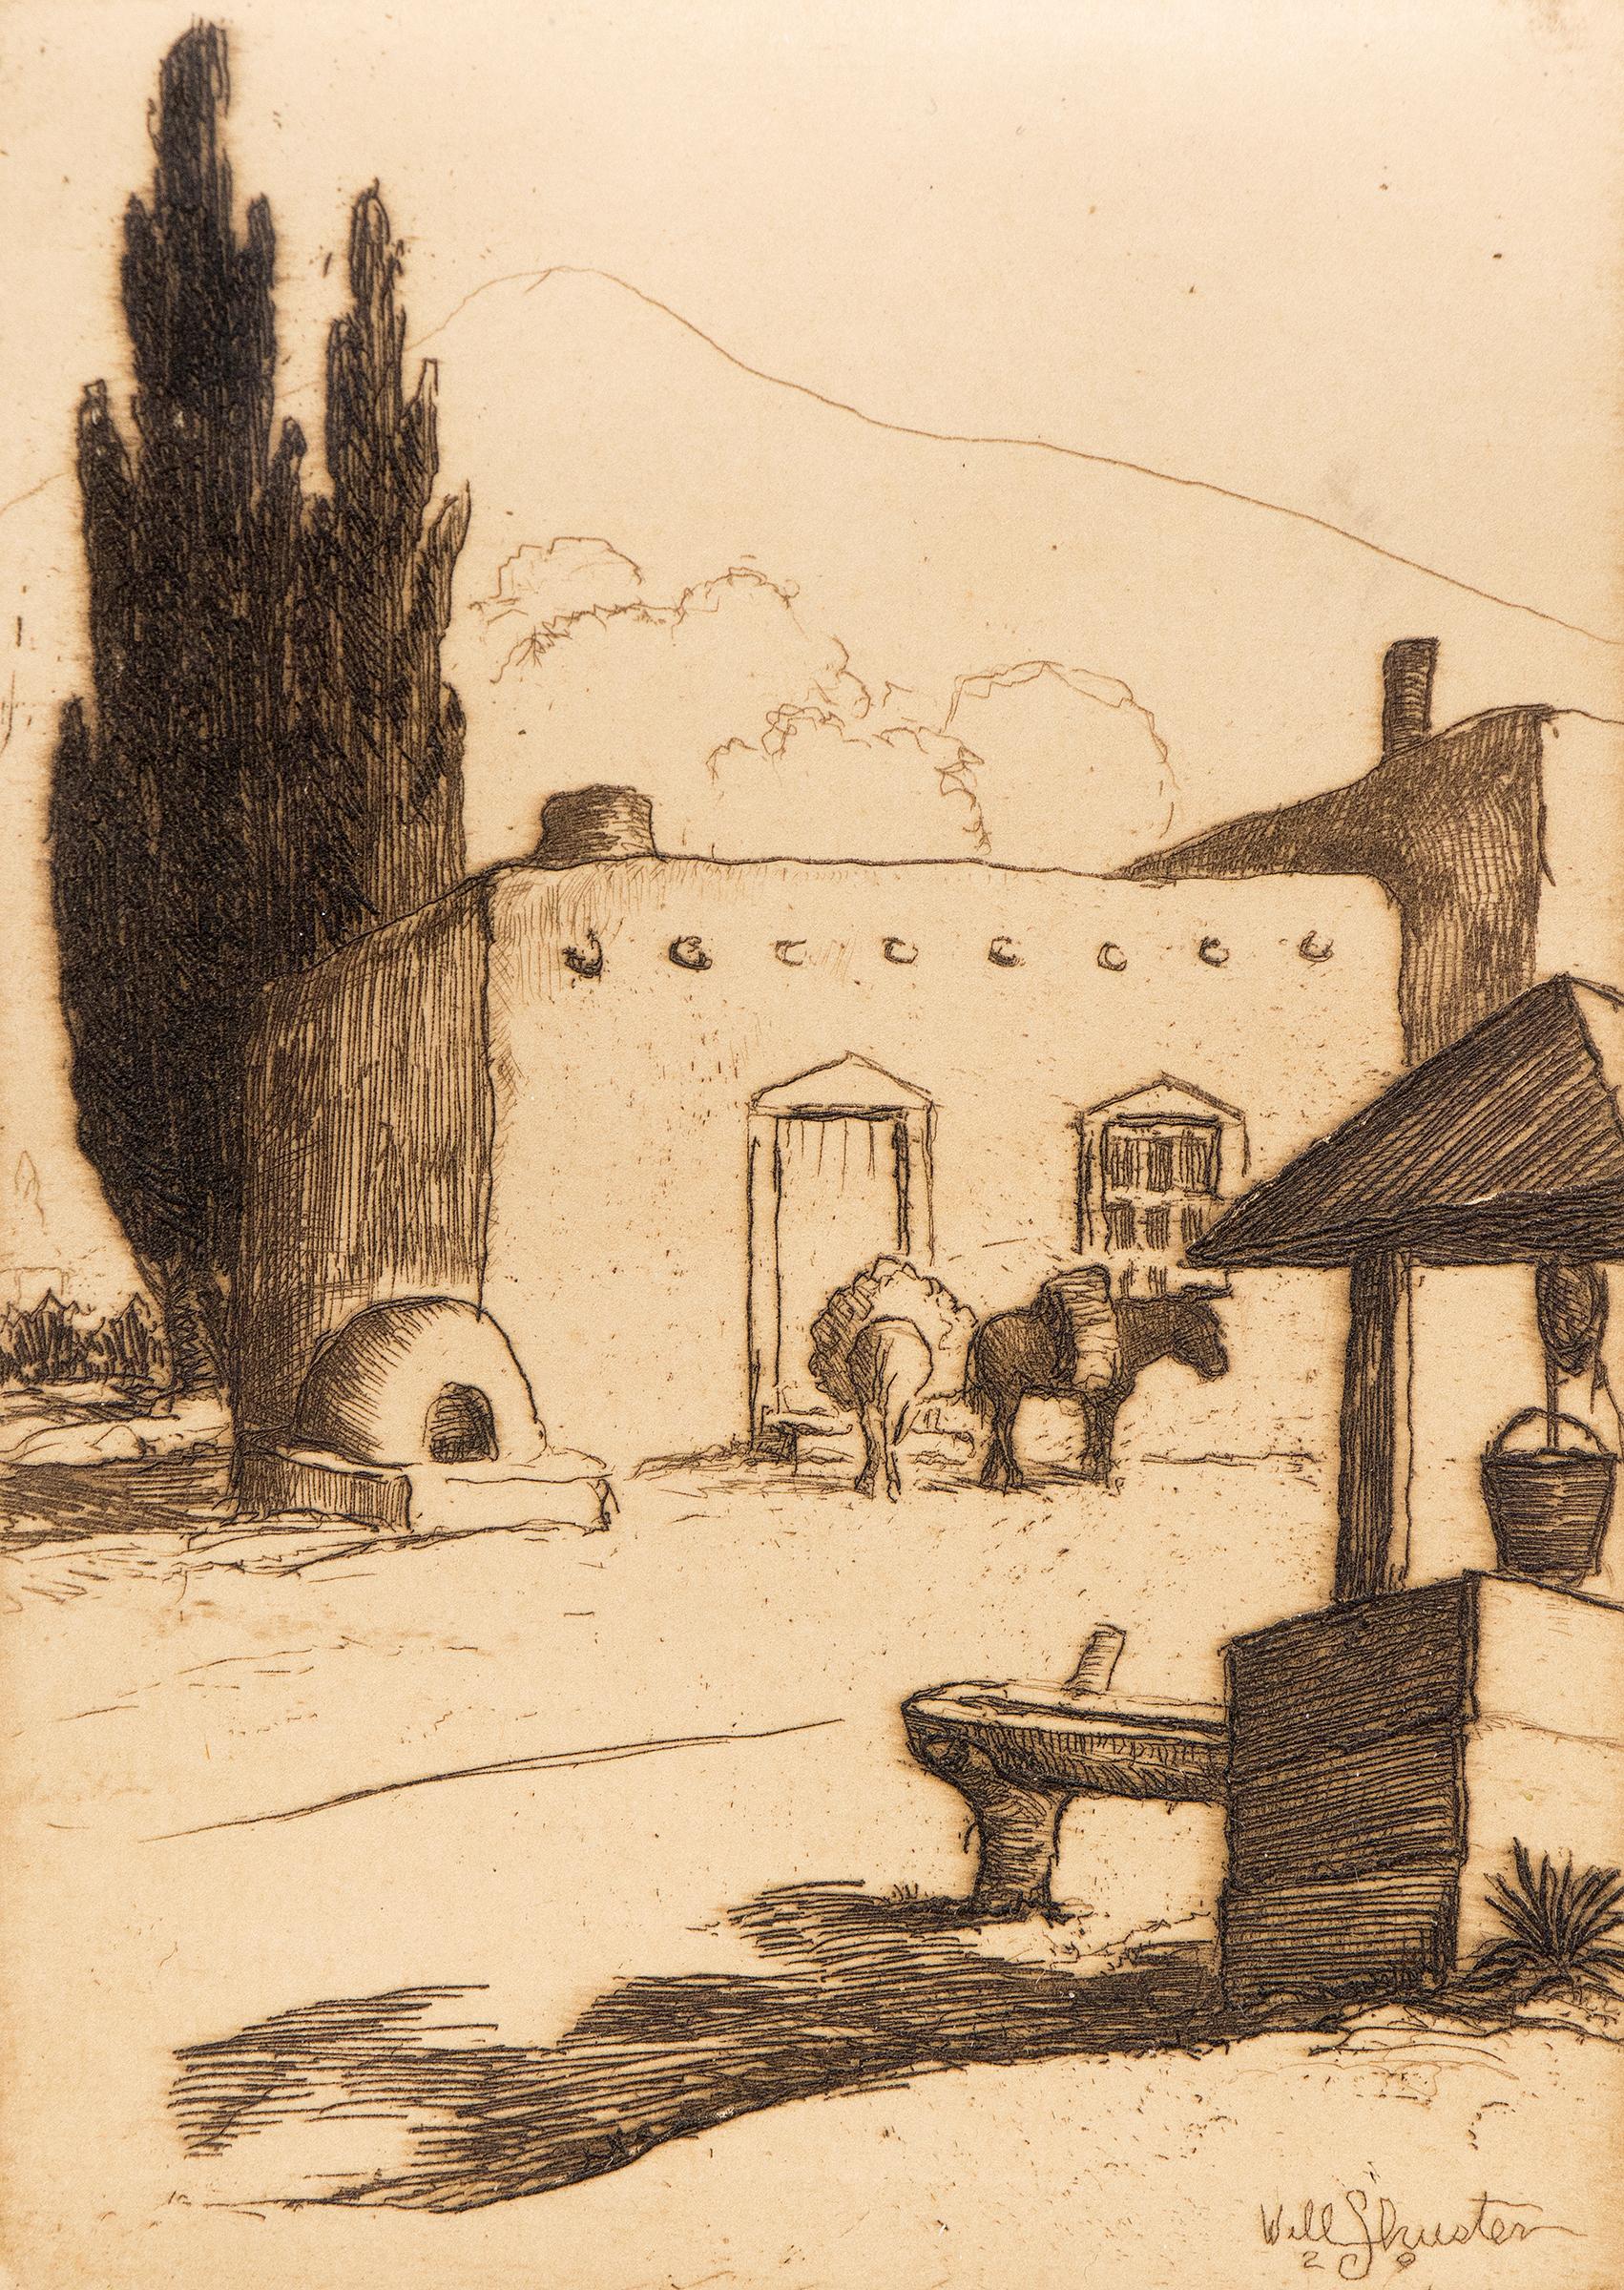 La Noria, 1920s New Mexico Adobe House Landscape Etching, Well, Trees, Sky  - Print by Will (William Howard) Shuster